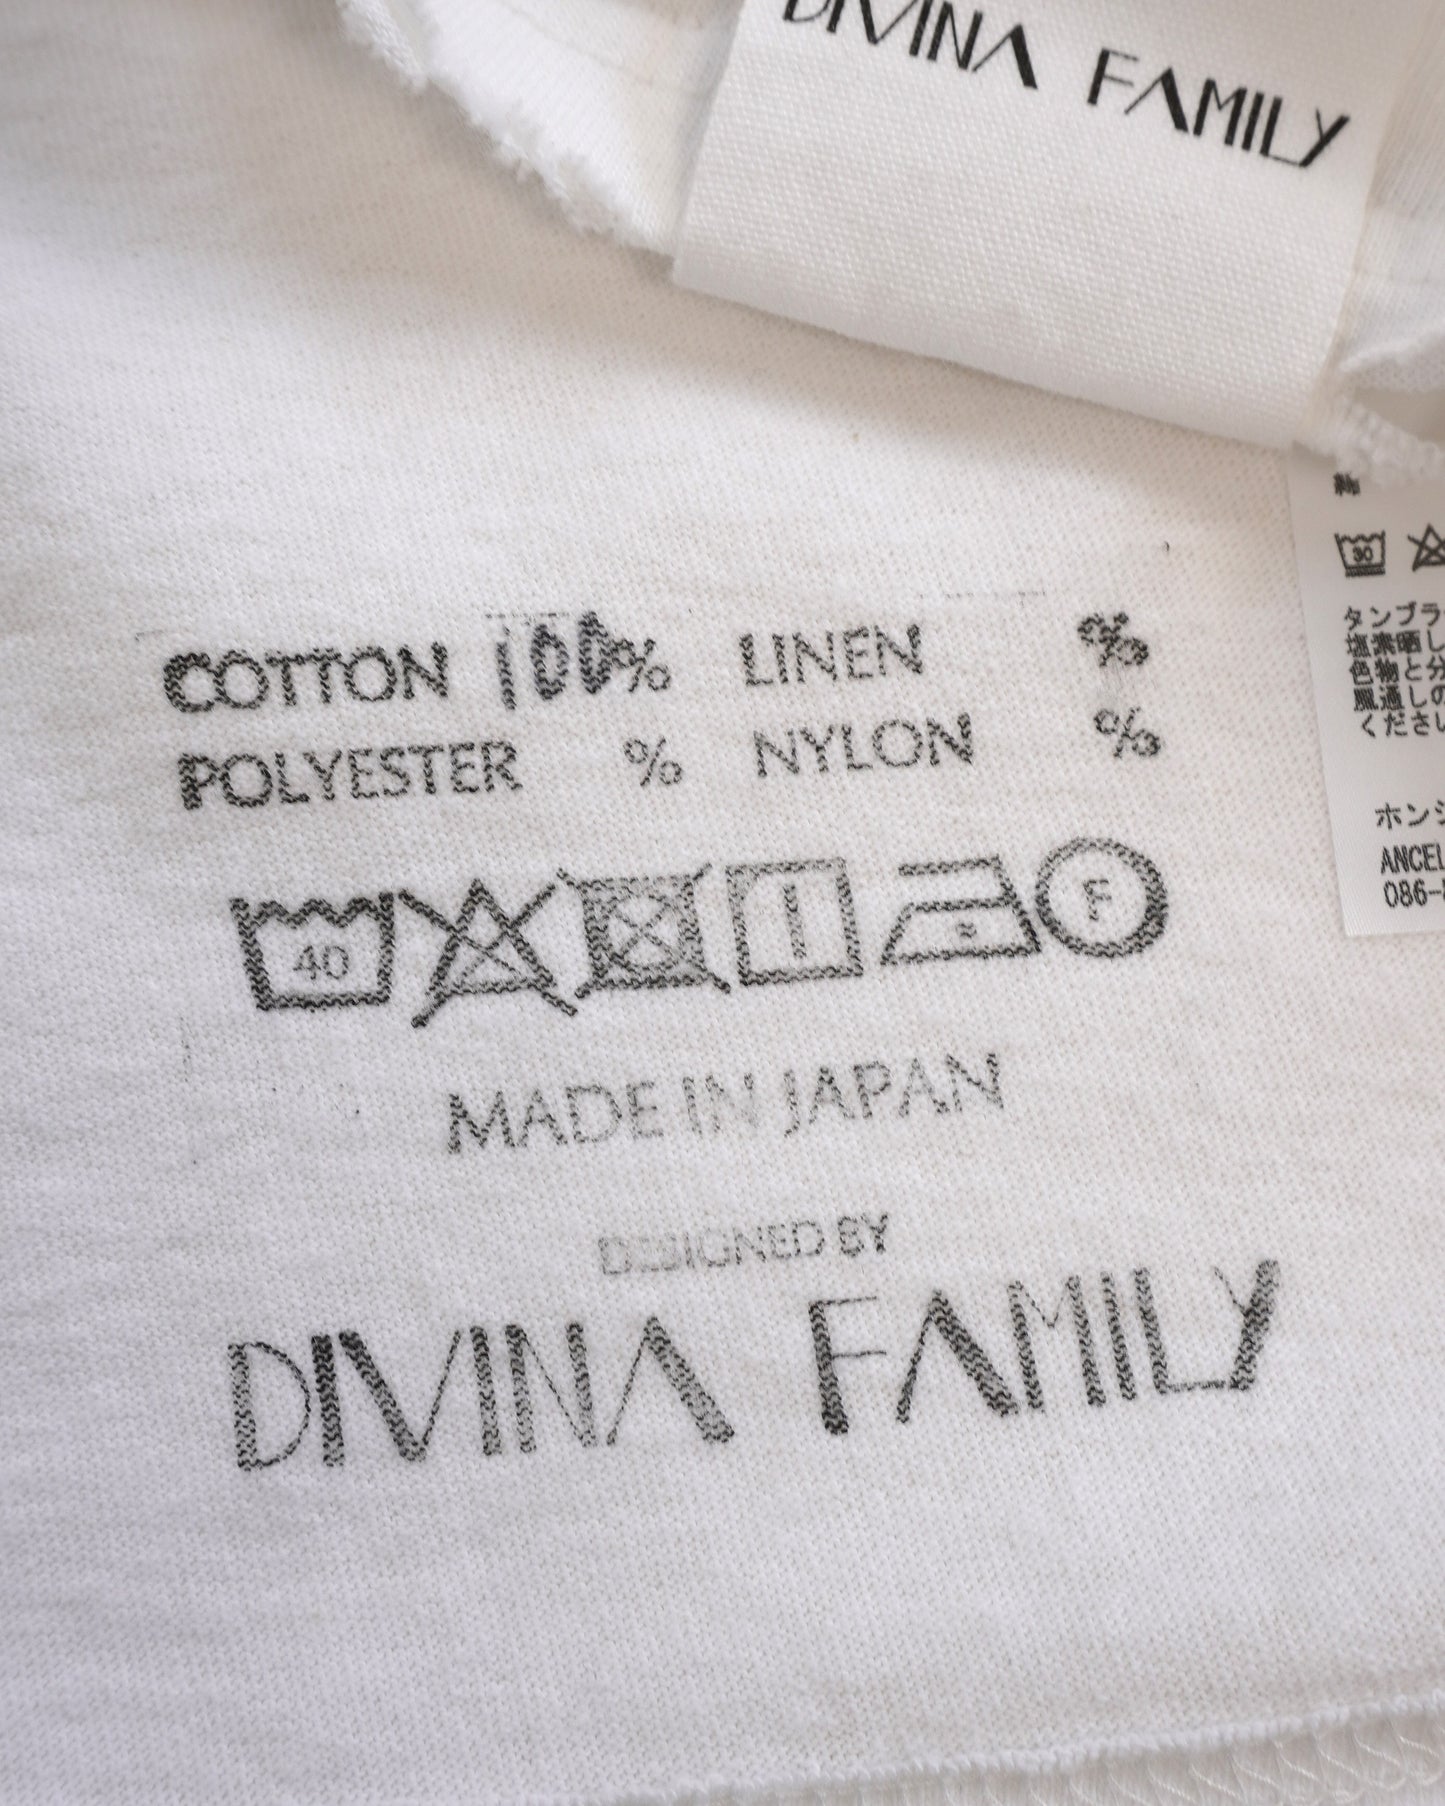 [ANCELLM/exclusive] DIVINA FAMILY × ANCELLM T-SHIRT(IVORY)